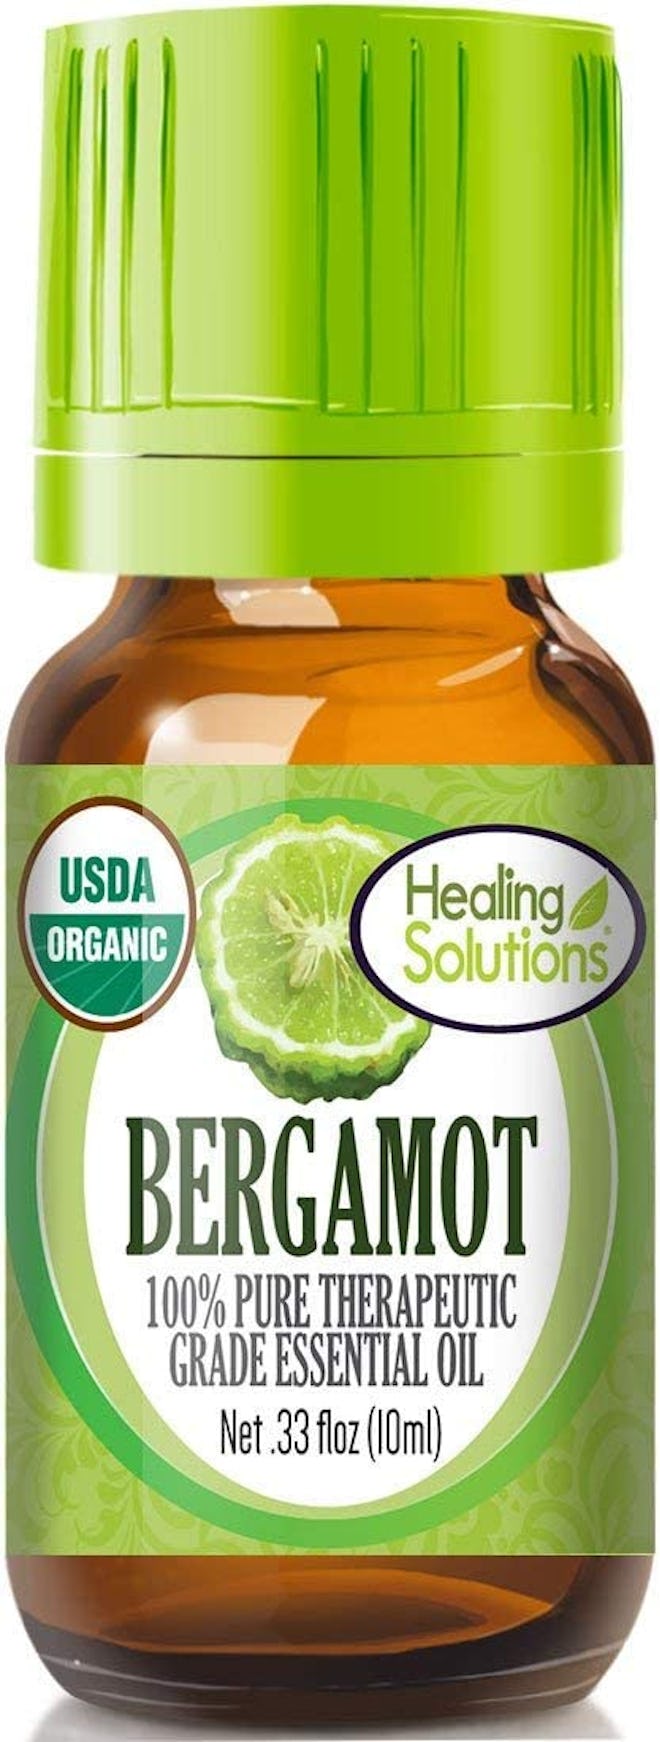 This bergamot essential oil for dryer balls is energizing and uplifting.